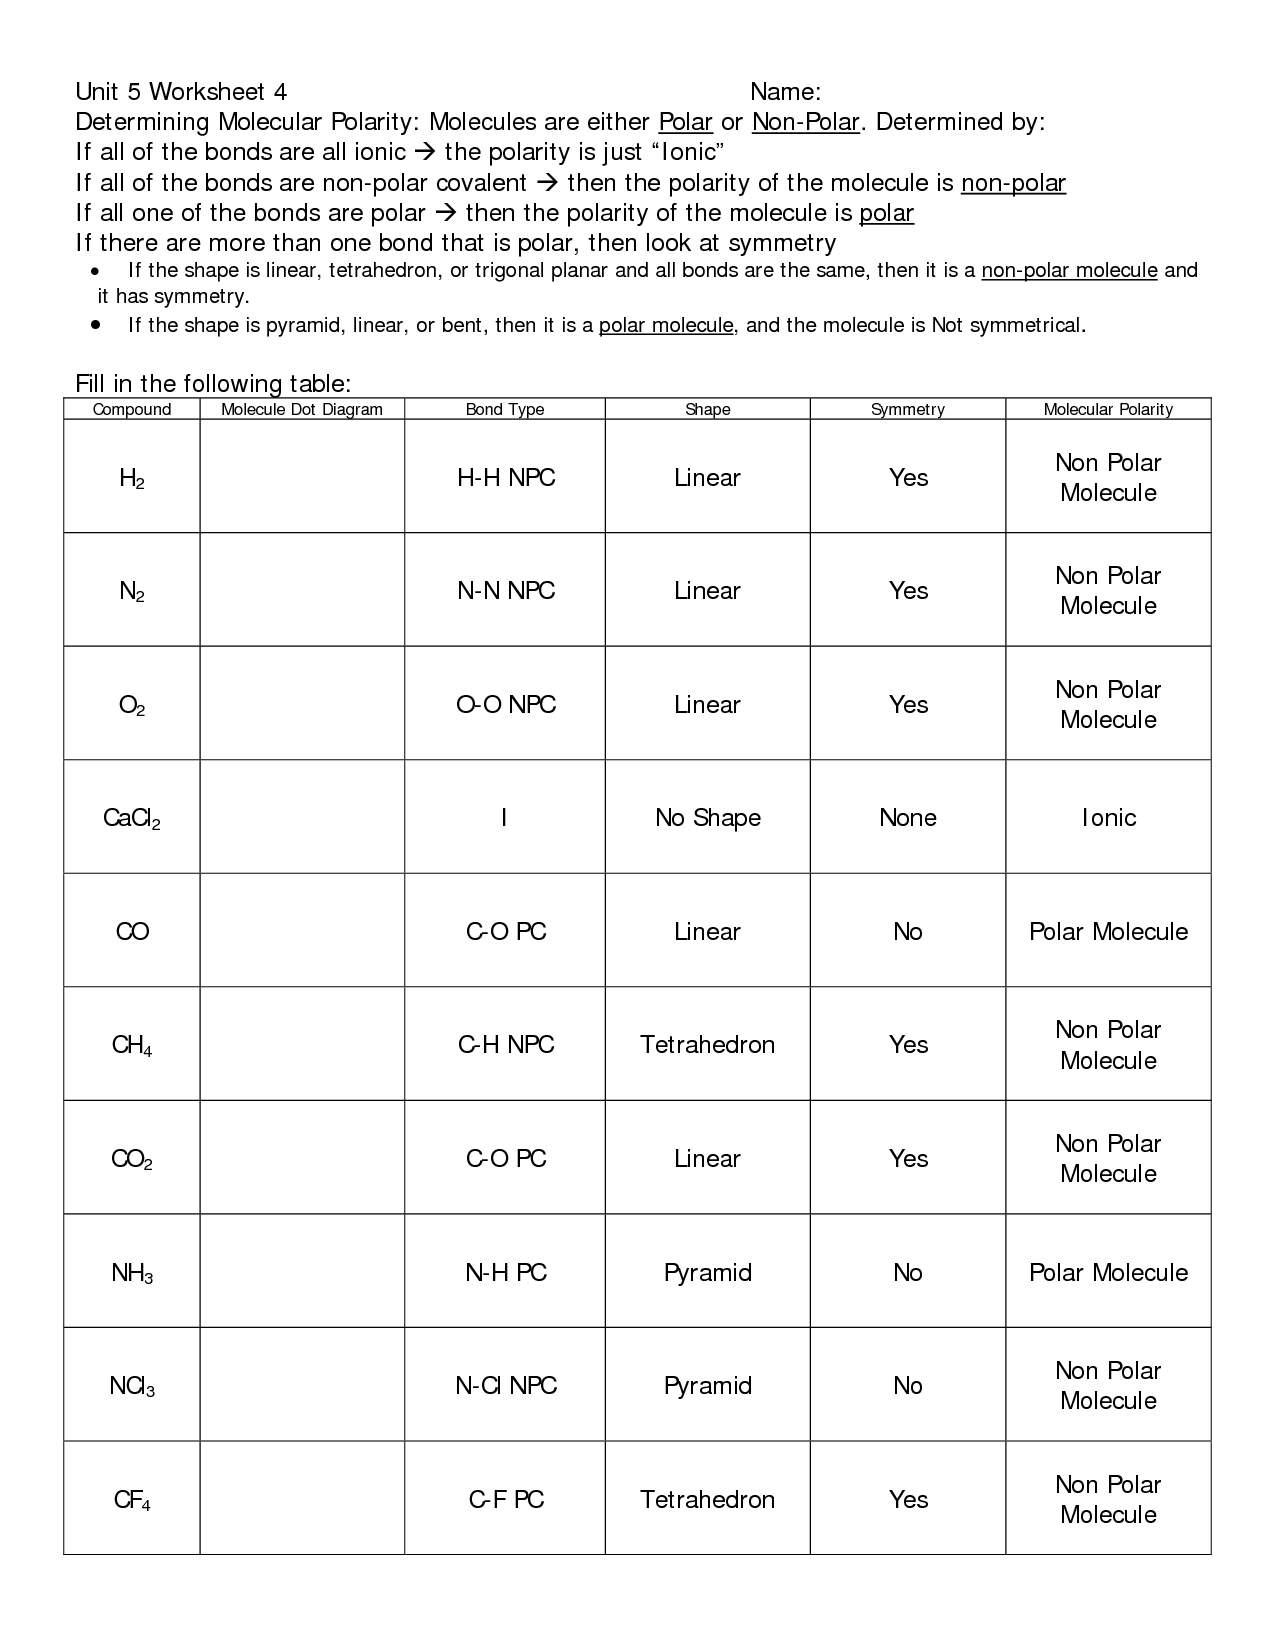 electronegativity-practice-worksheet-answers